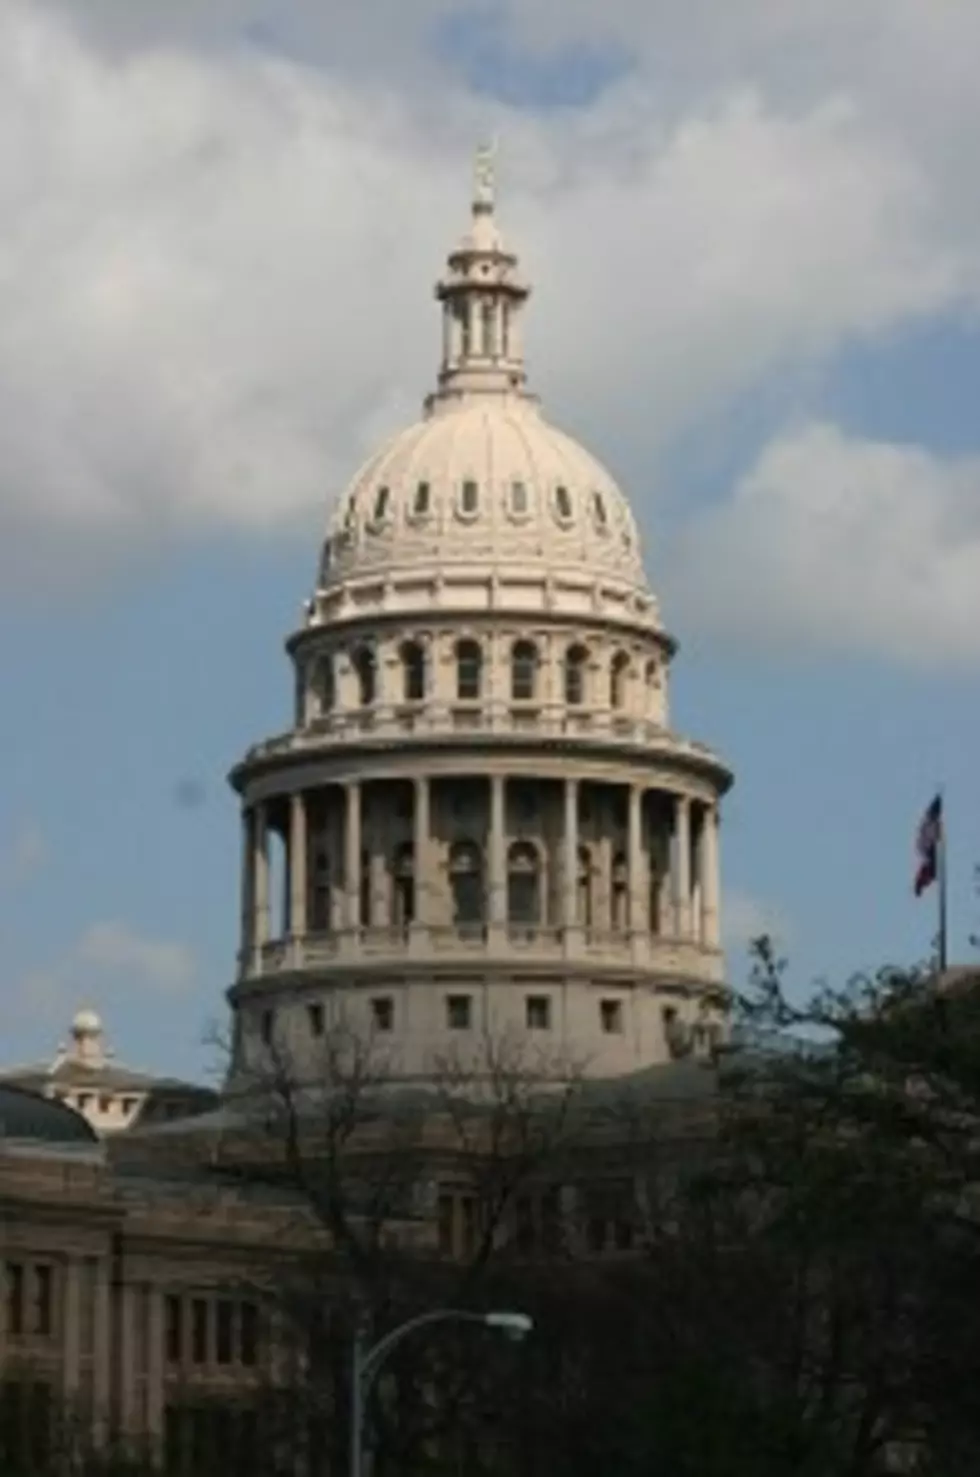 Texas Tea Party Stages Anti-Health Care Law Meet